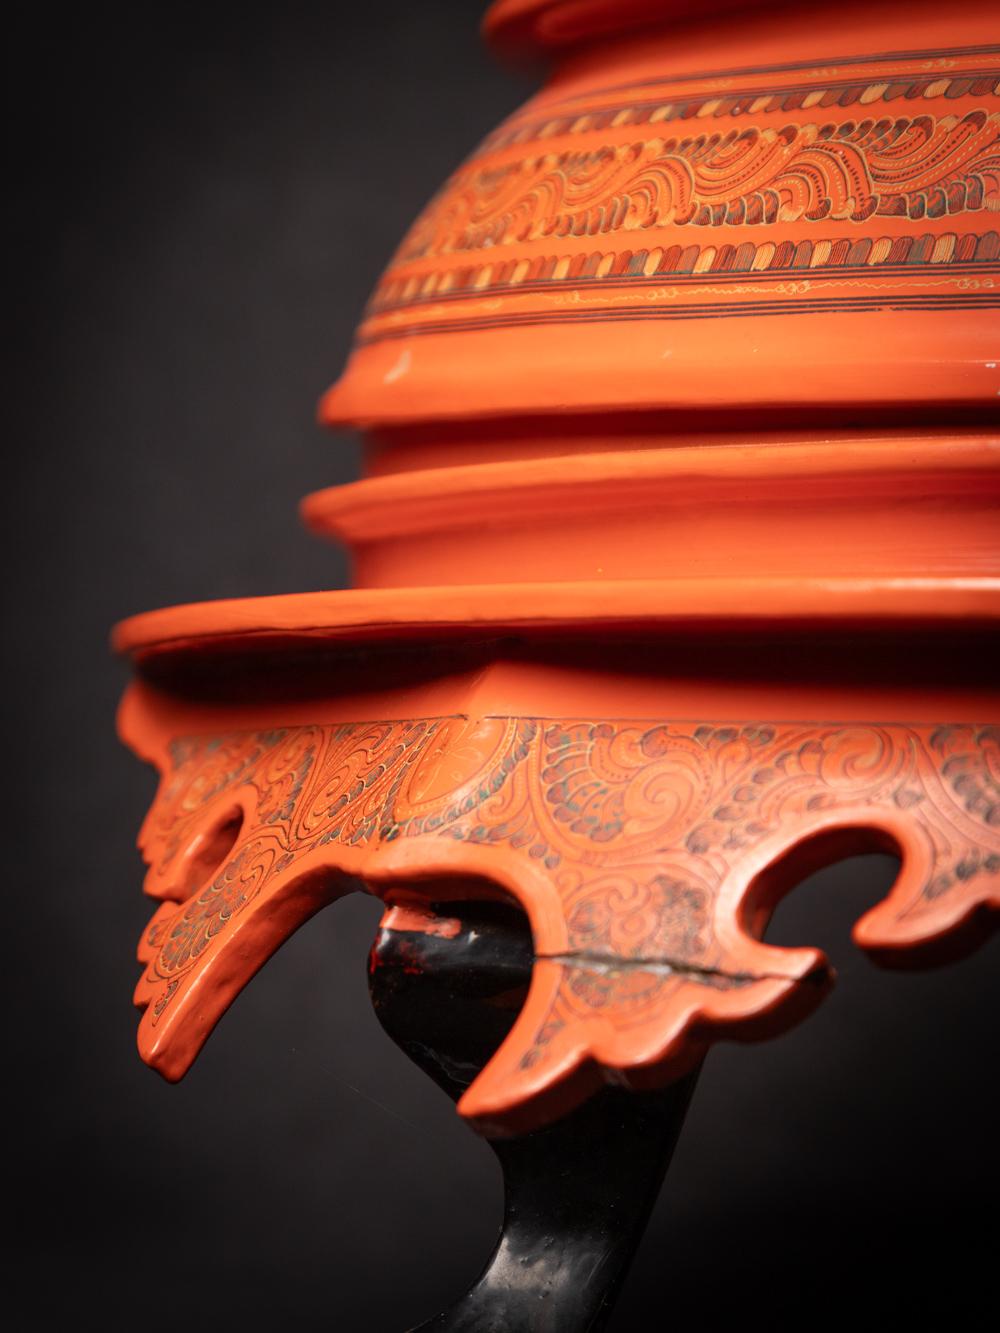 Lacquer Newly made Burmese lacquerware vessel from Burma - Original Buddhas For Sale